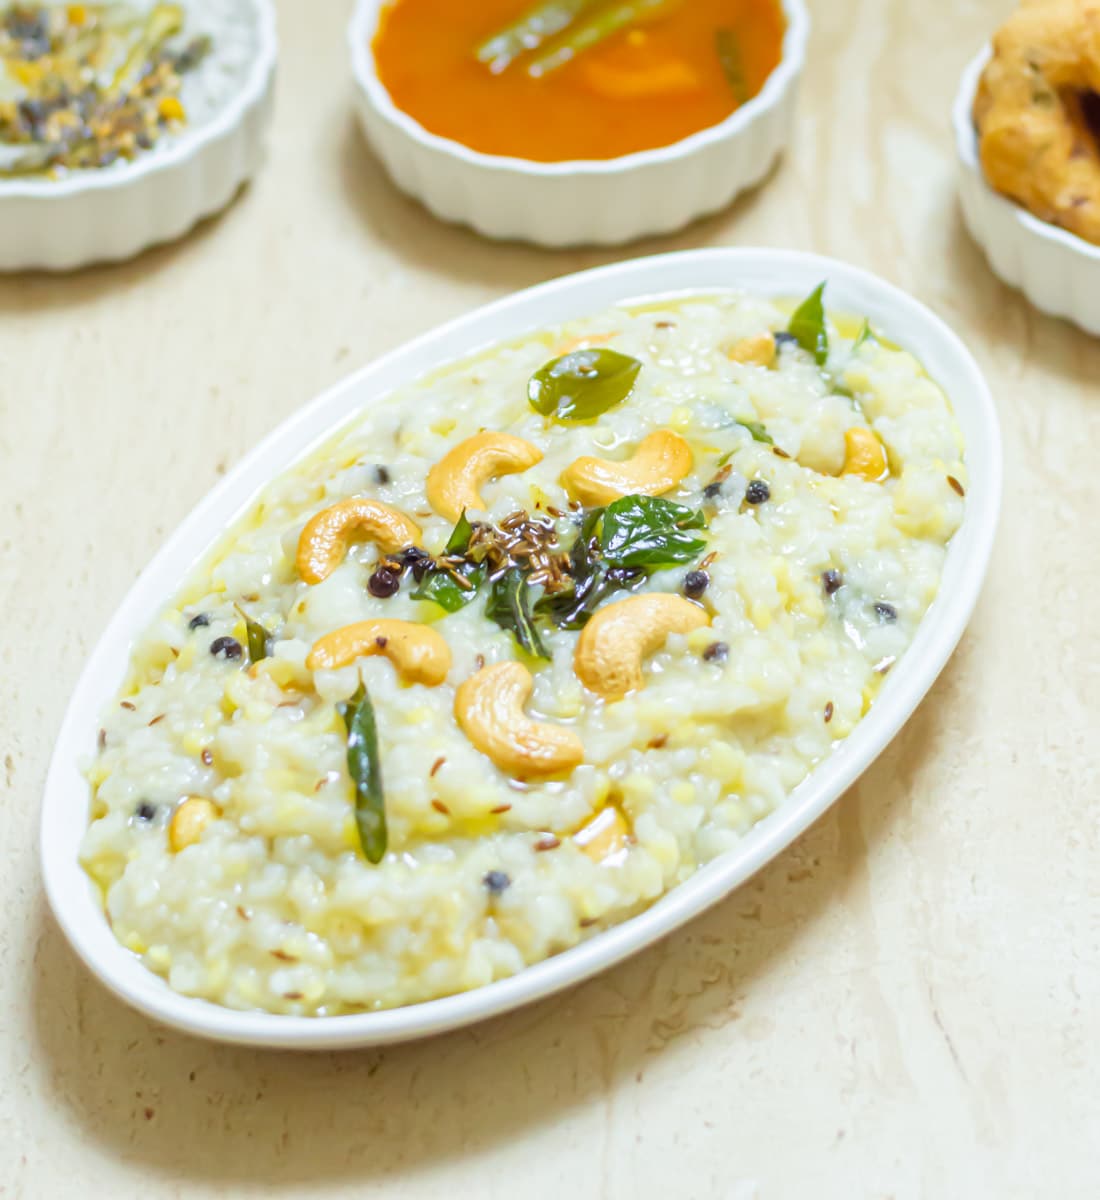 ven pongal in an oval bowl placed on a tile along with a bowls of chutney, sambar and vada.